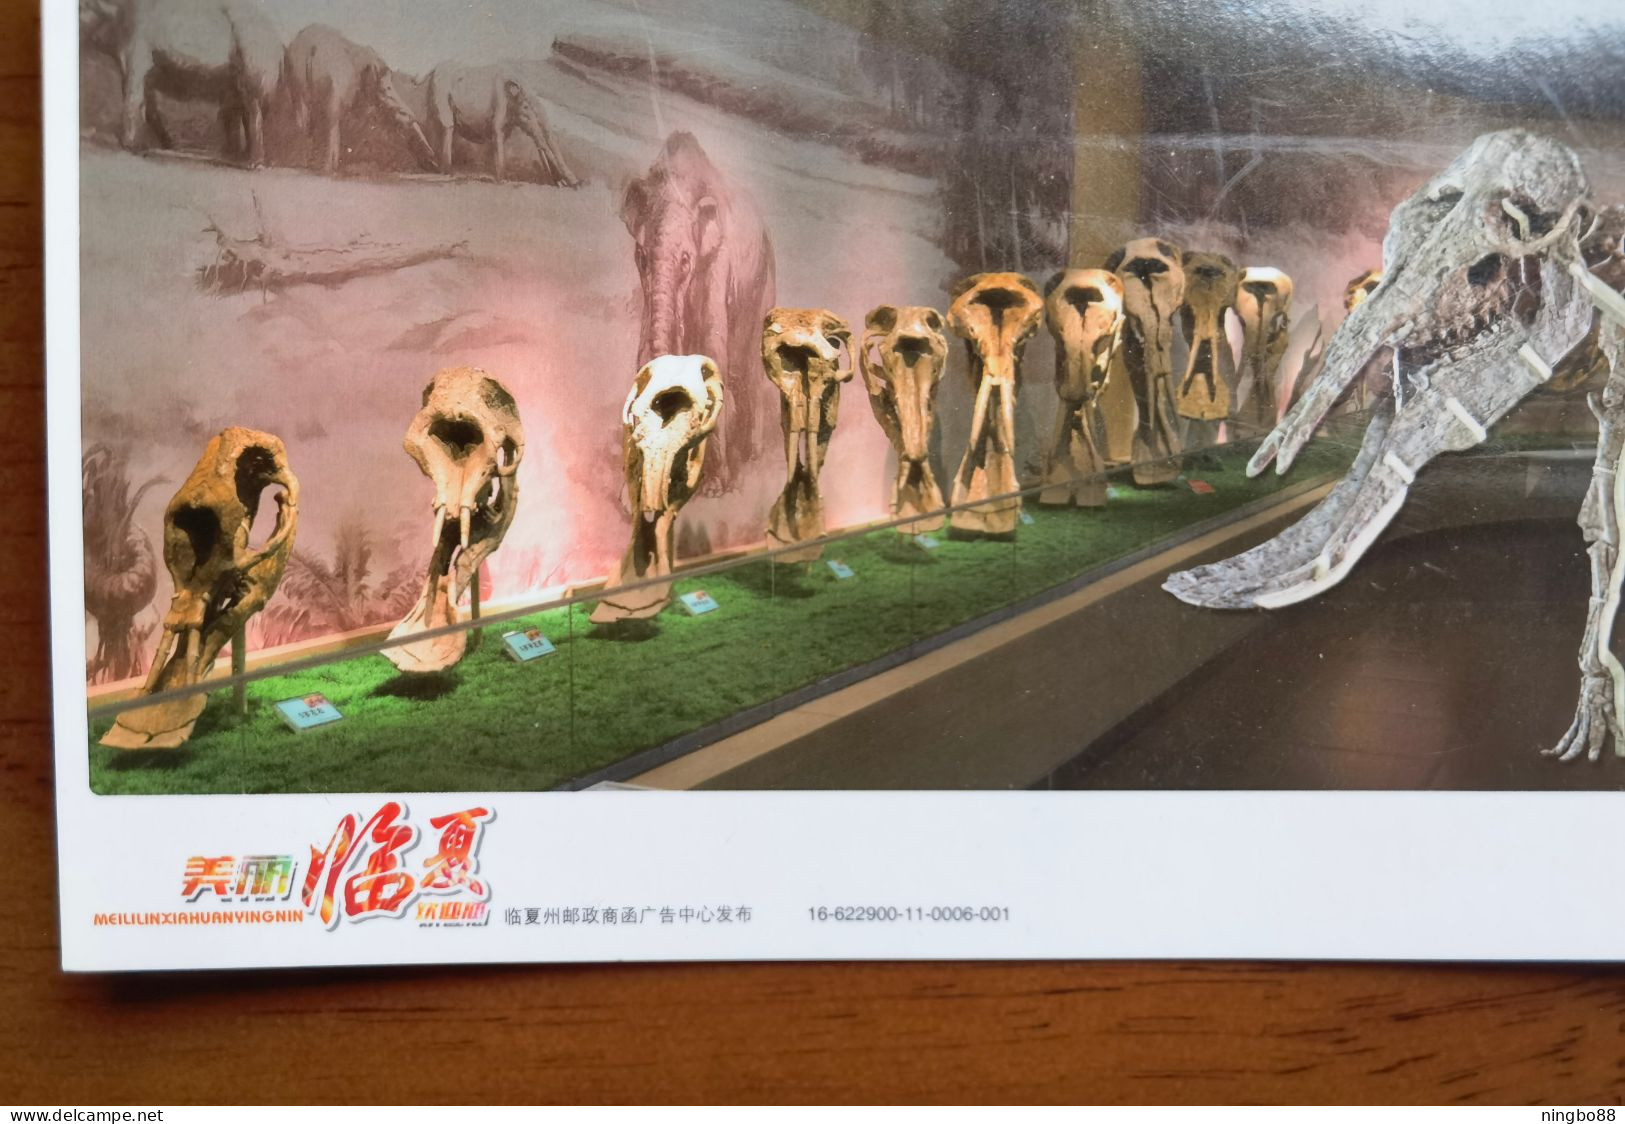 Linxia Platybelodon Danovi Elephant Fossil,China 2016 Hezheng Ancient Animal Fossil Museum Advertising Pre-stamped Card - Fossiles